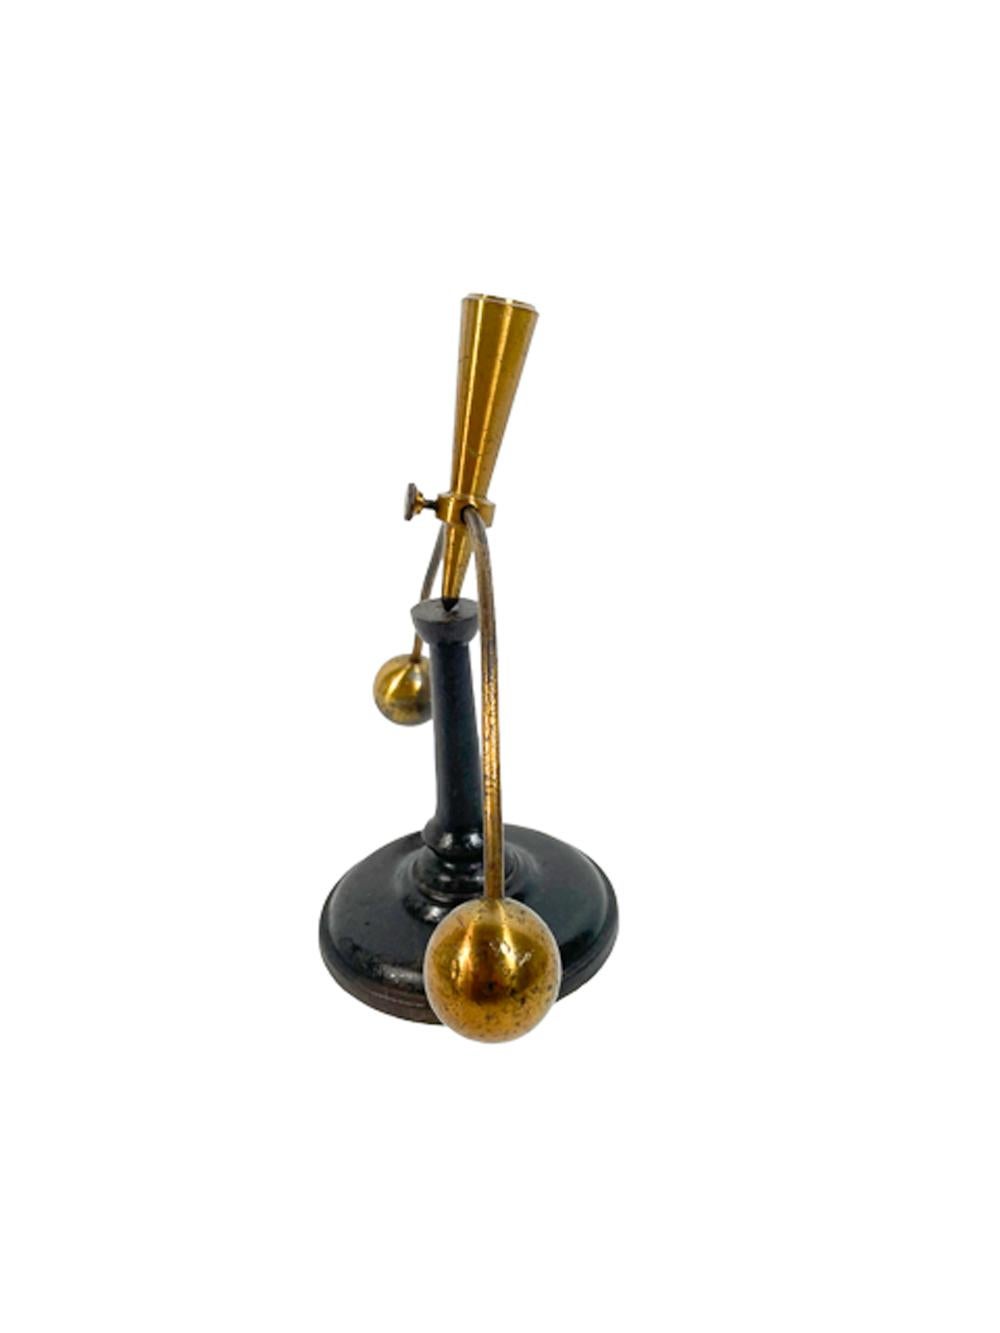 Antique Cast Iron & Lacquered Brass Max Kohl Type Didactic Balance Device In Good Condition For Sale In Chapel Hill, NC